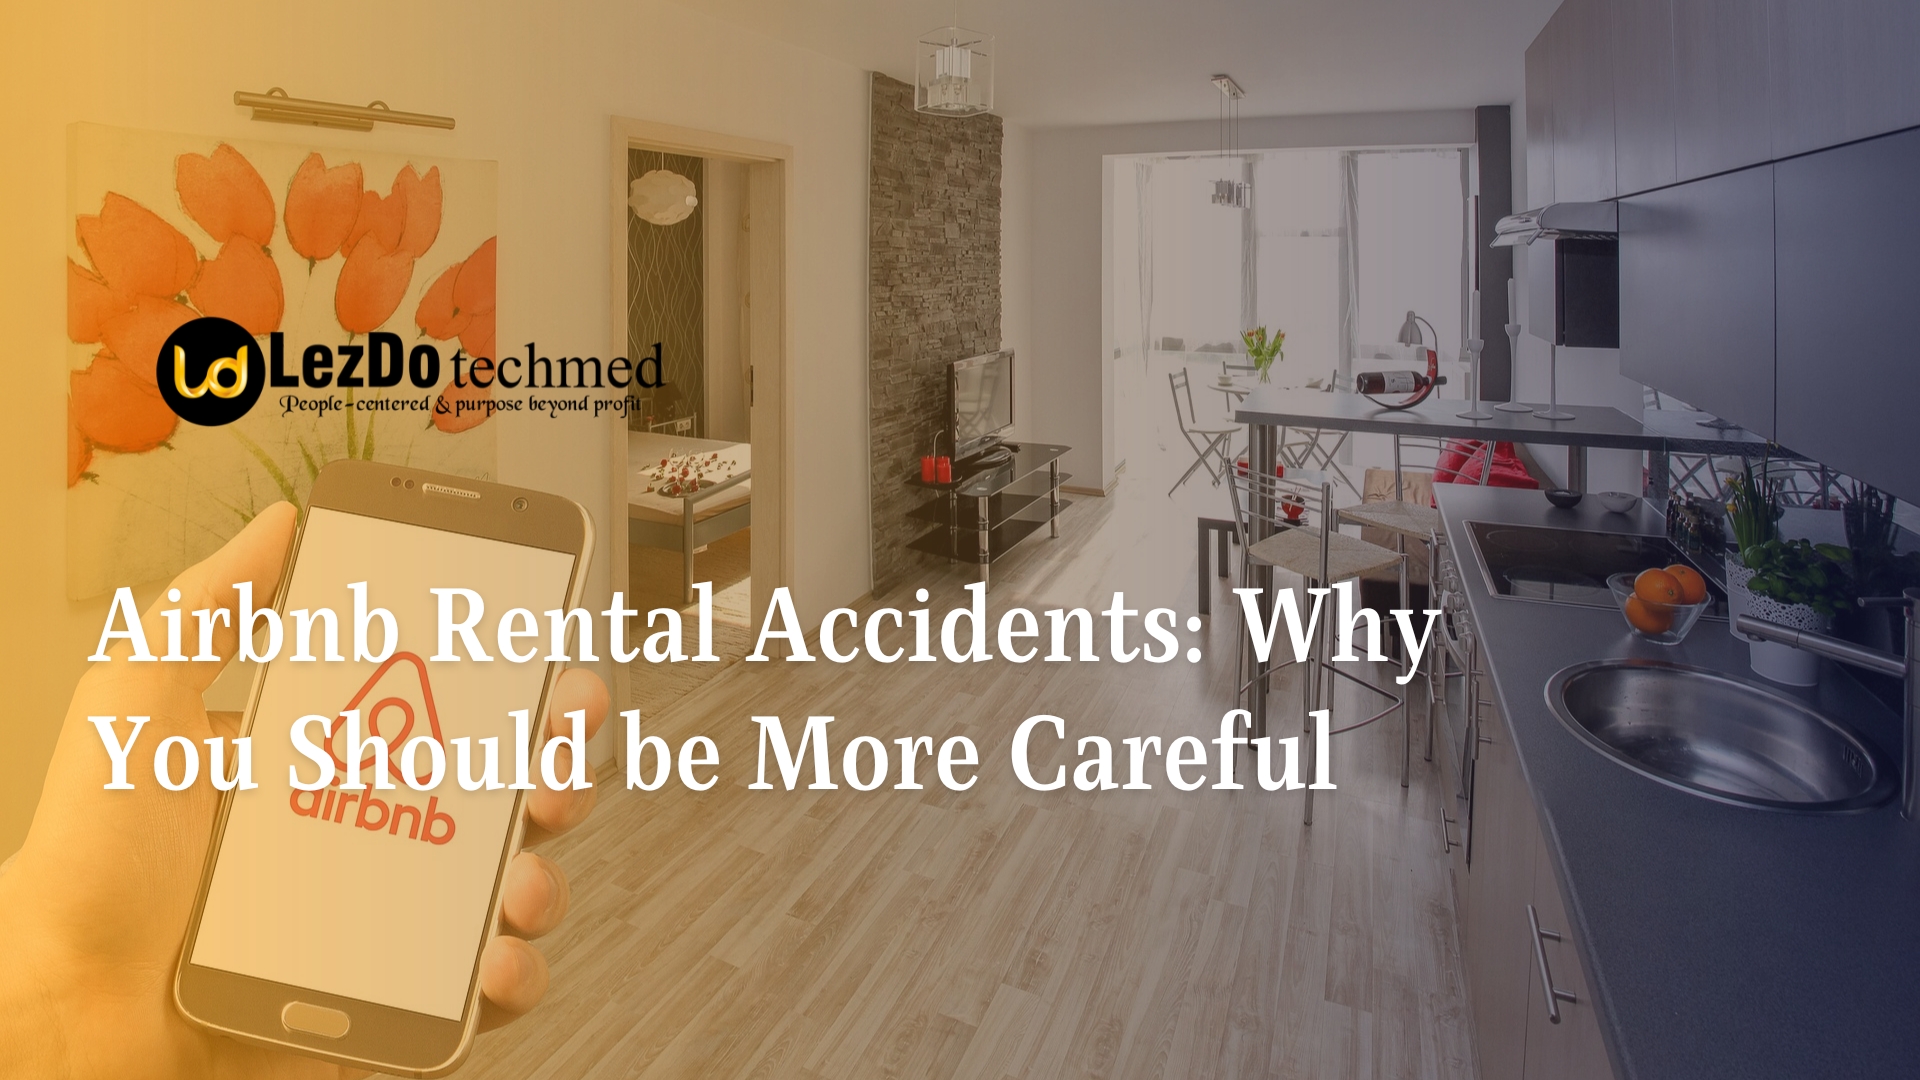 Airbnb Rental Accidents: Why You Should be More Careful